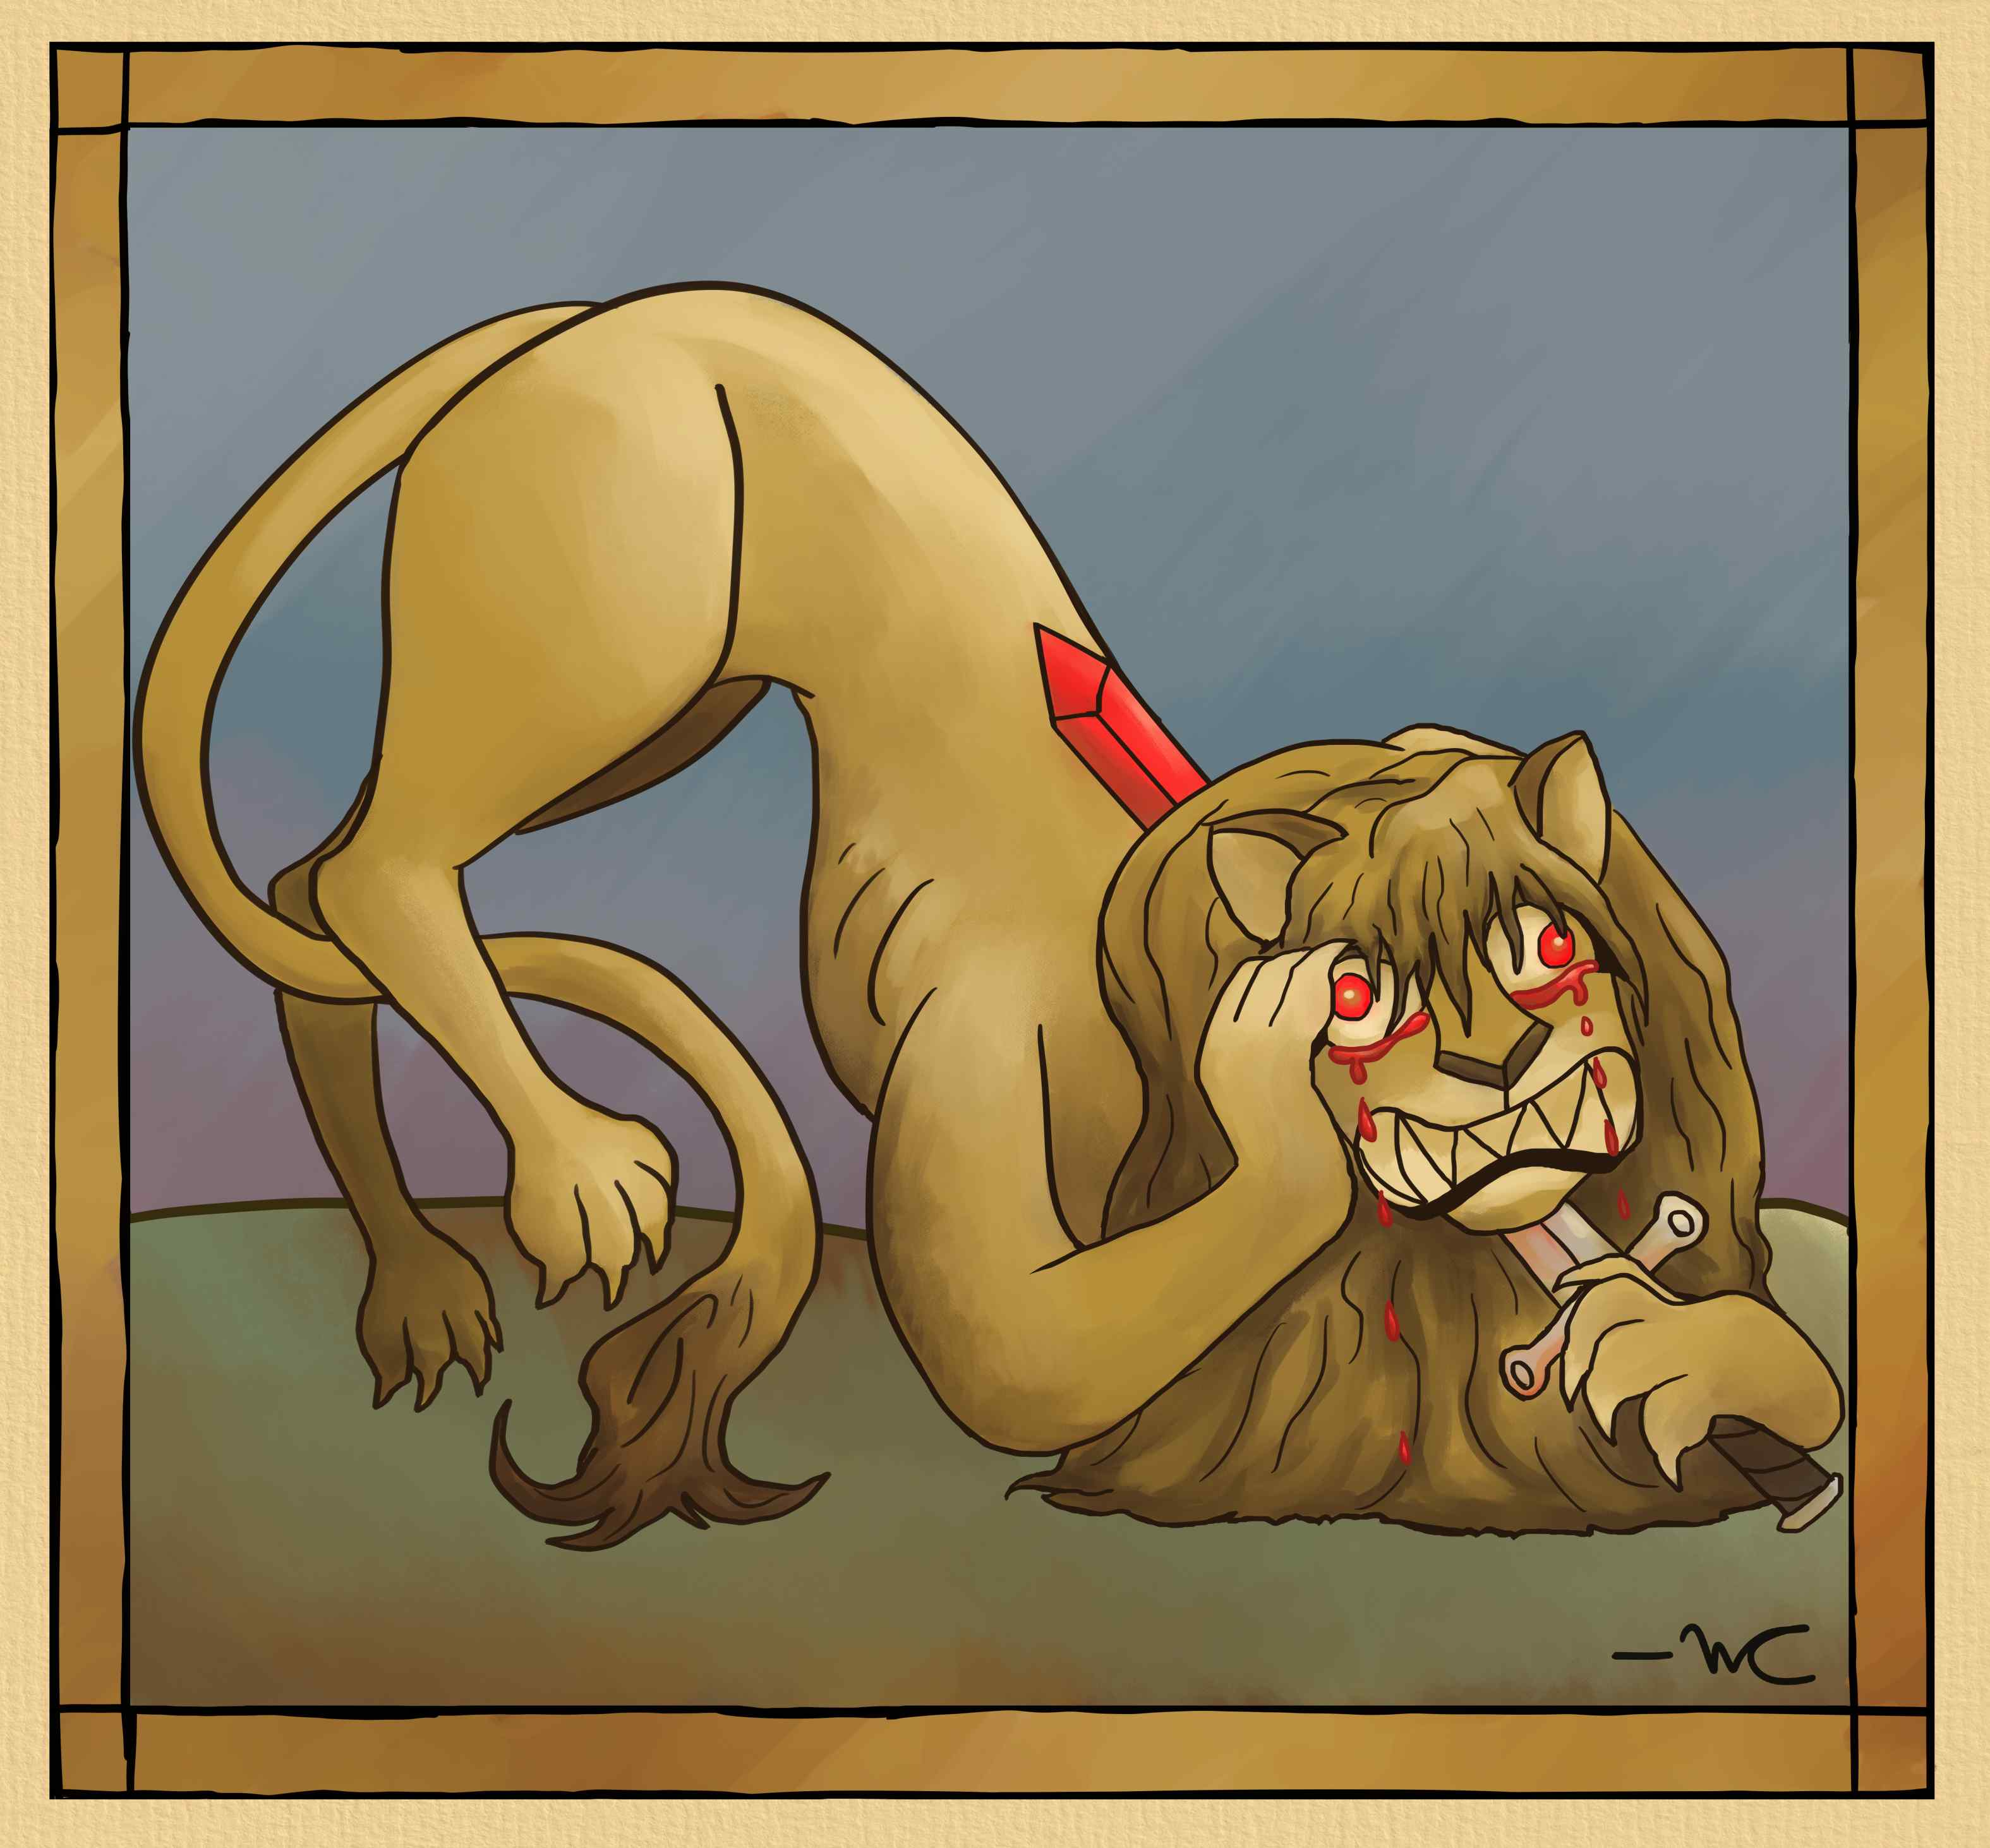 A digital drawing of a lion shoving a sword through its neck. It is crying blood.